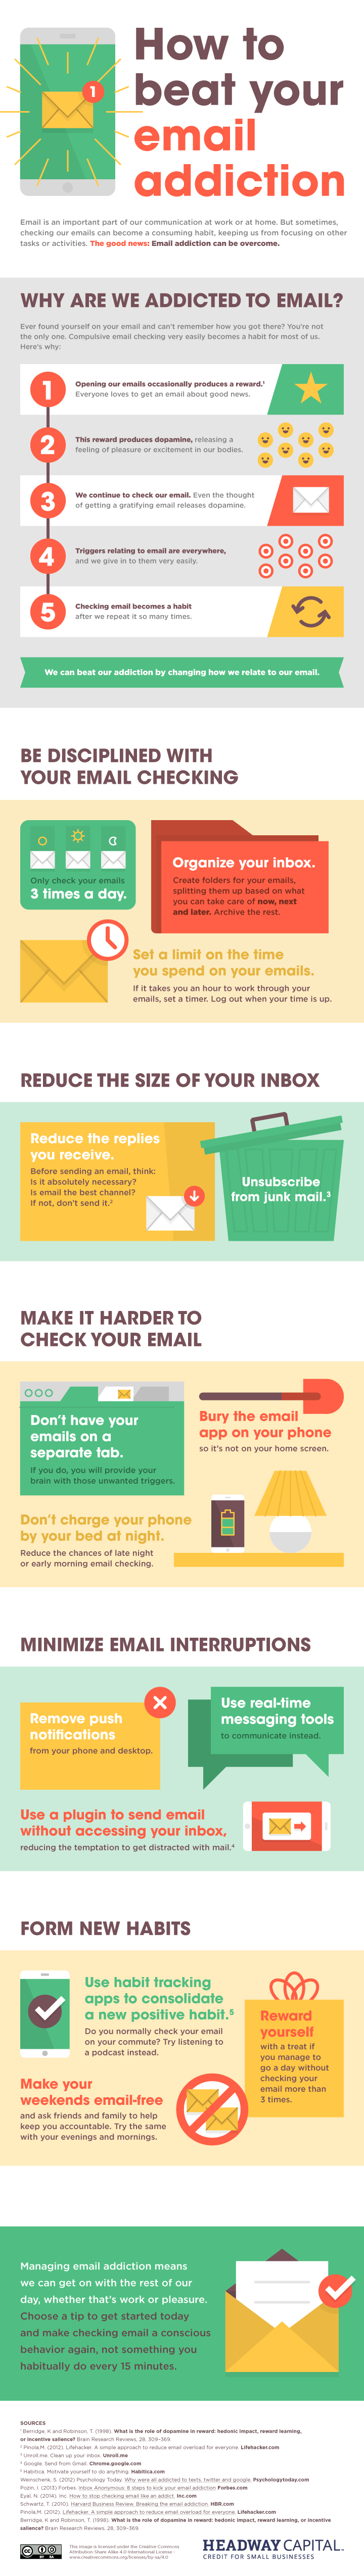 How-to-beat-your-email-addiction-DV2